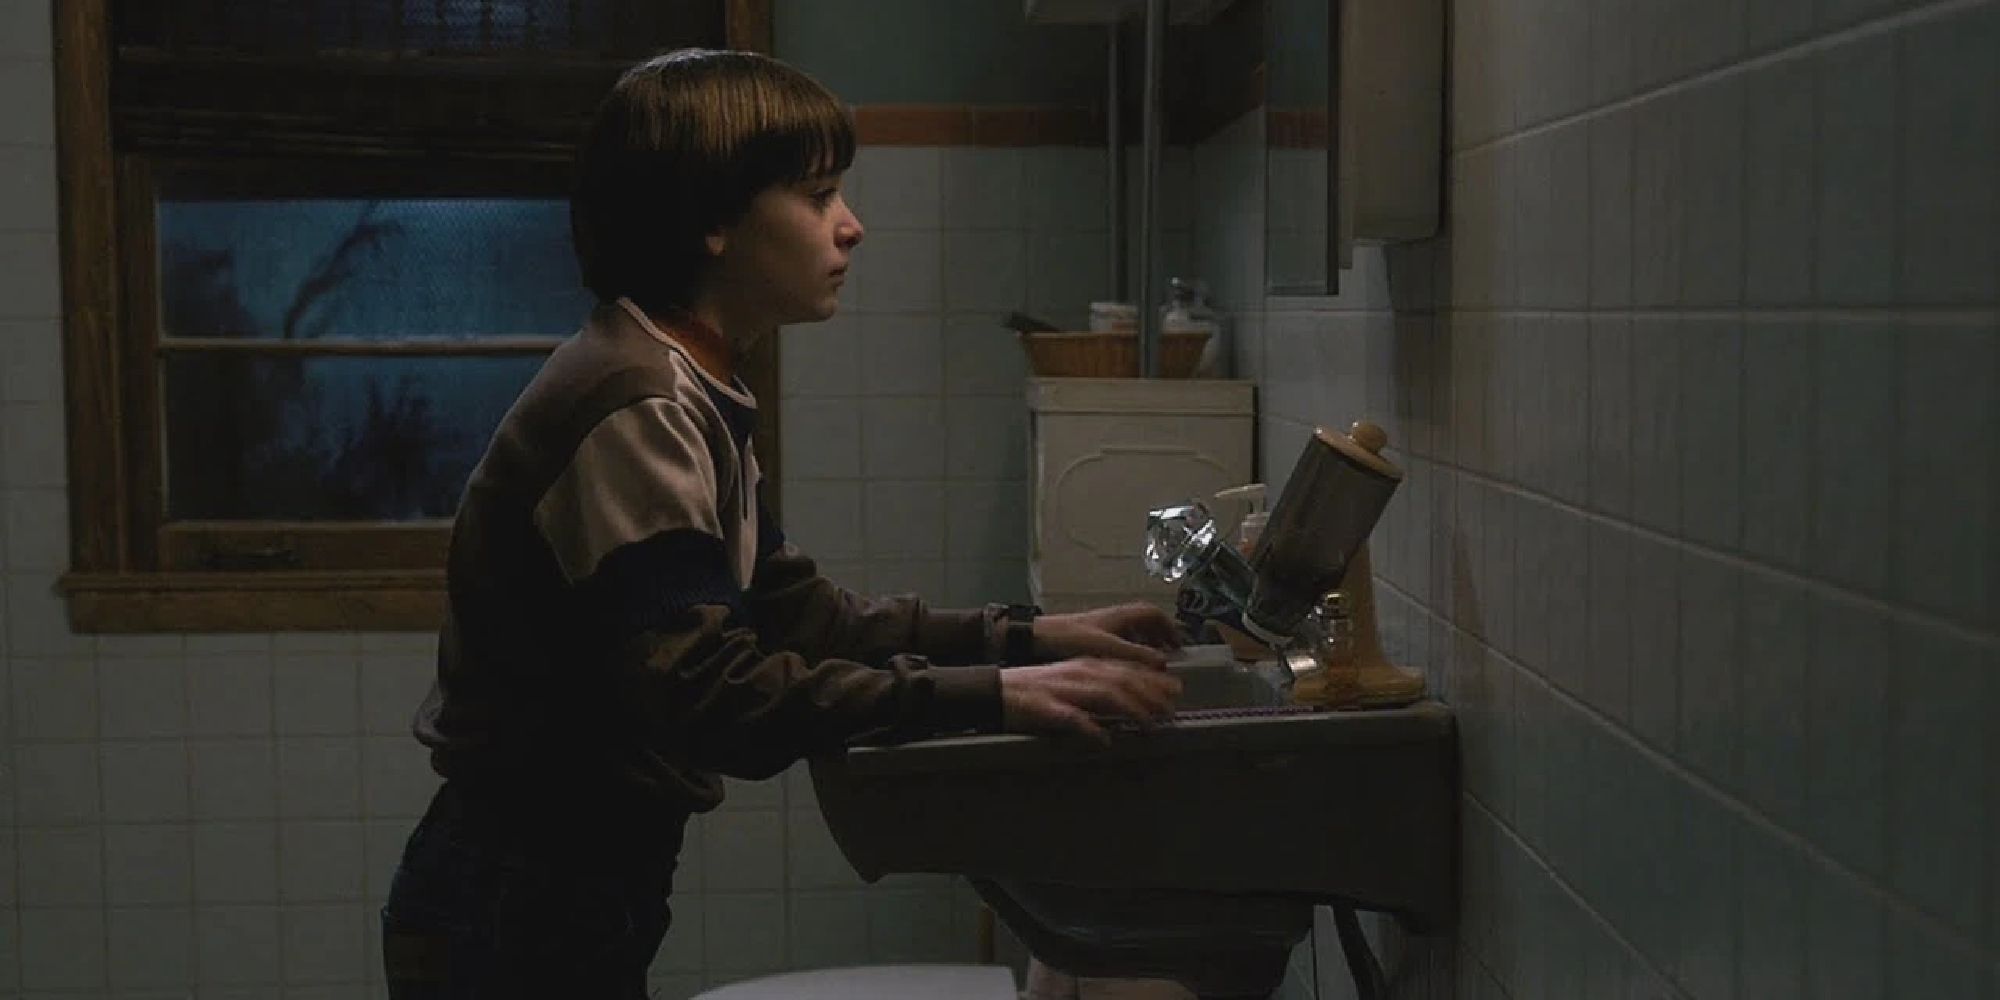 Will throwing up in the bathroom at the end of Season 1